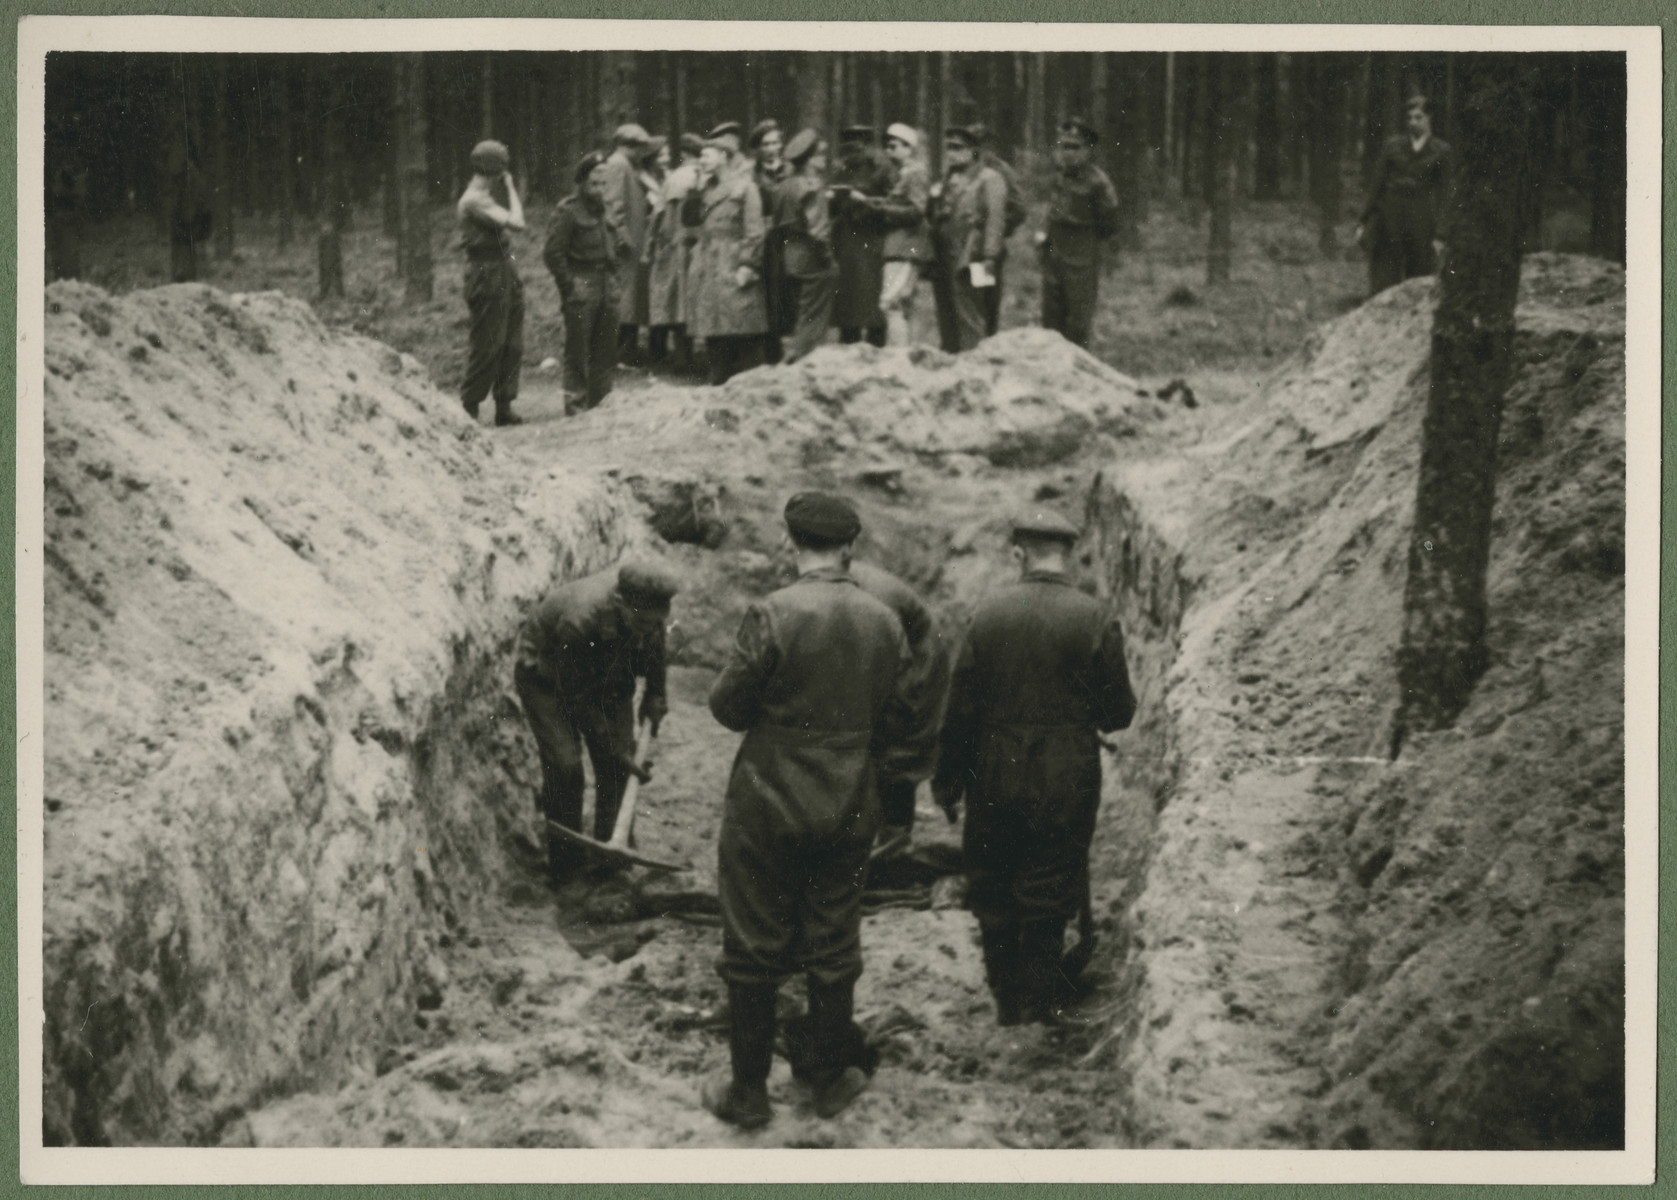 Under the supervision of British troops, German civilians and Nazi officials exhume the corpses of 243 slave laborers for proper reburial.  The victims were shot by their guards on the railway lines at Lueneberg on the way to the Belsen Camp.